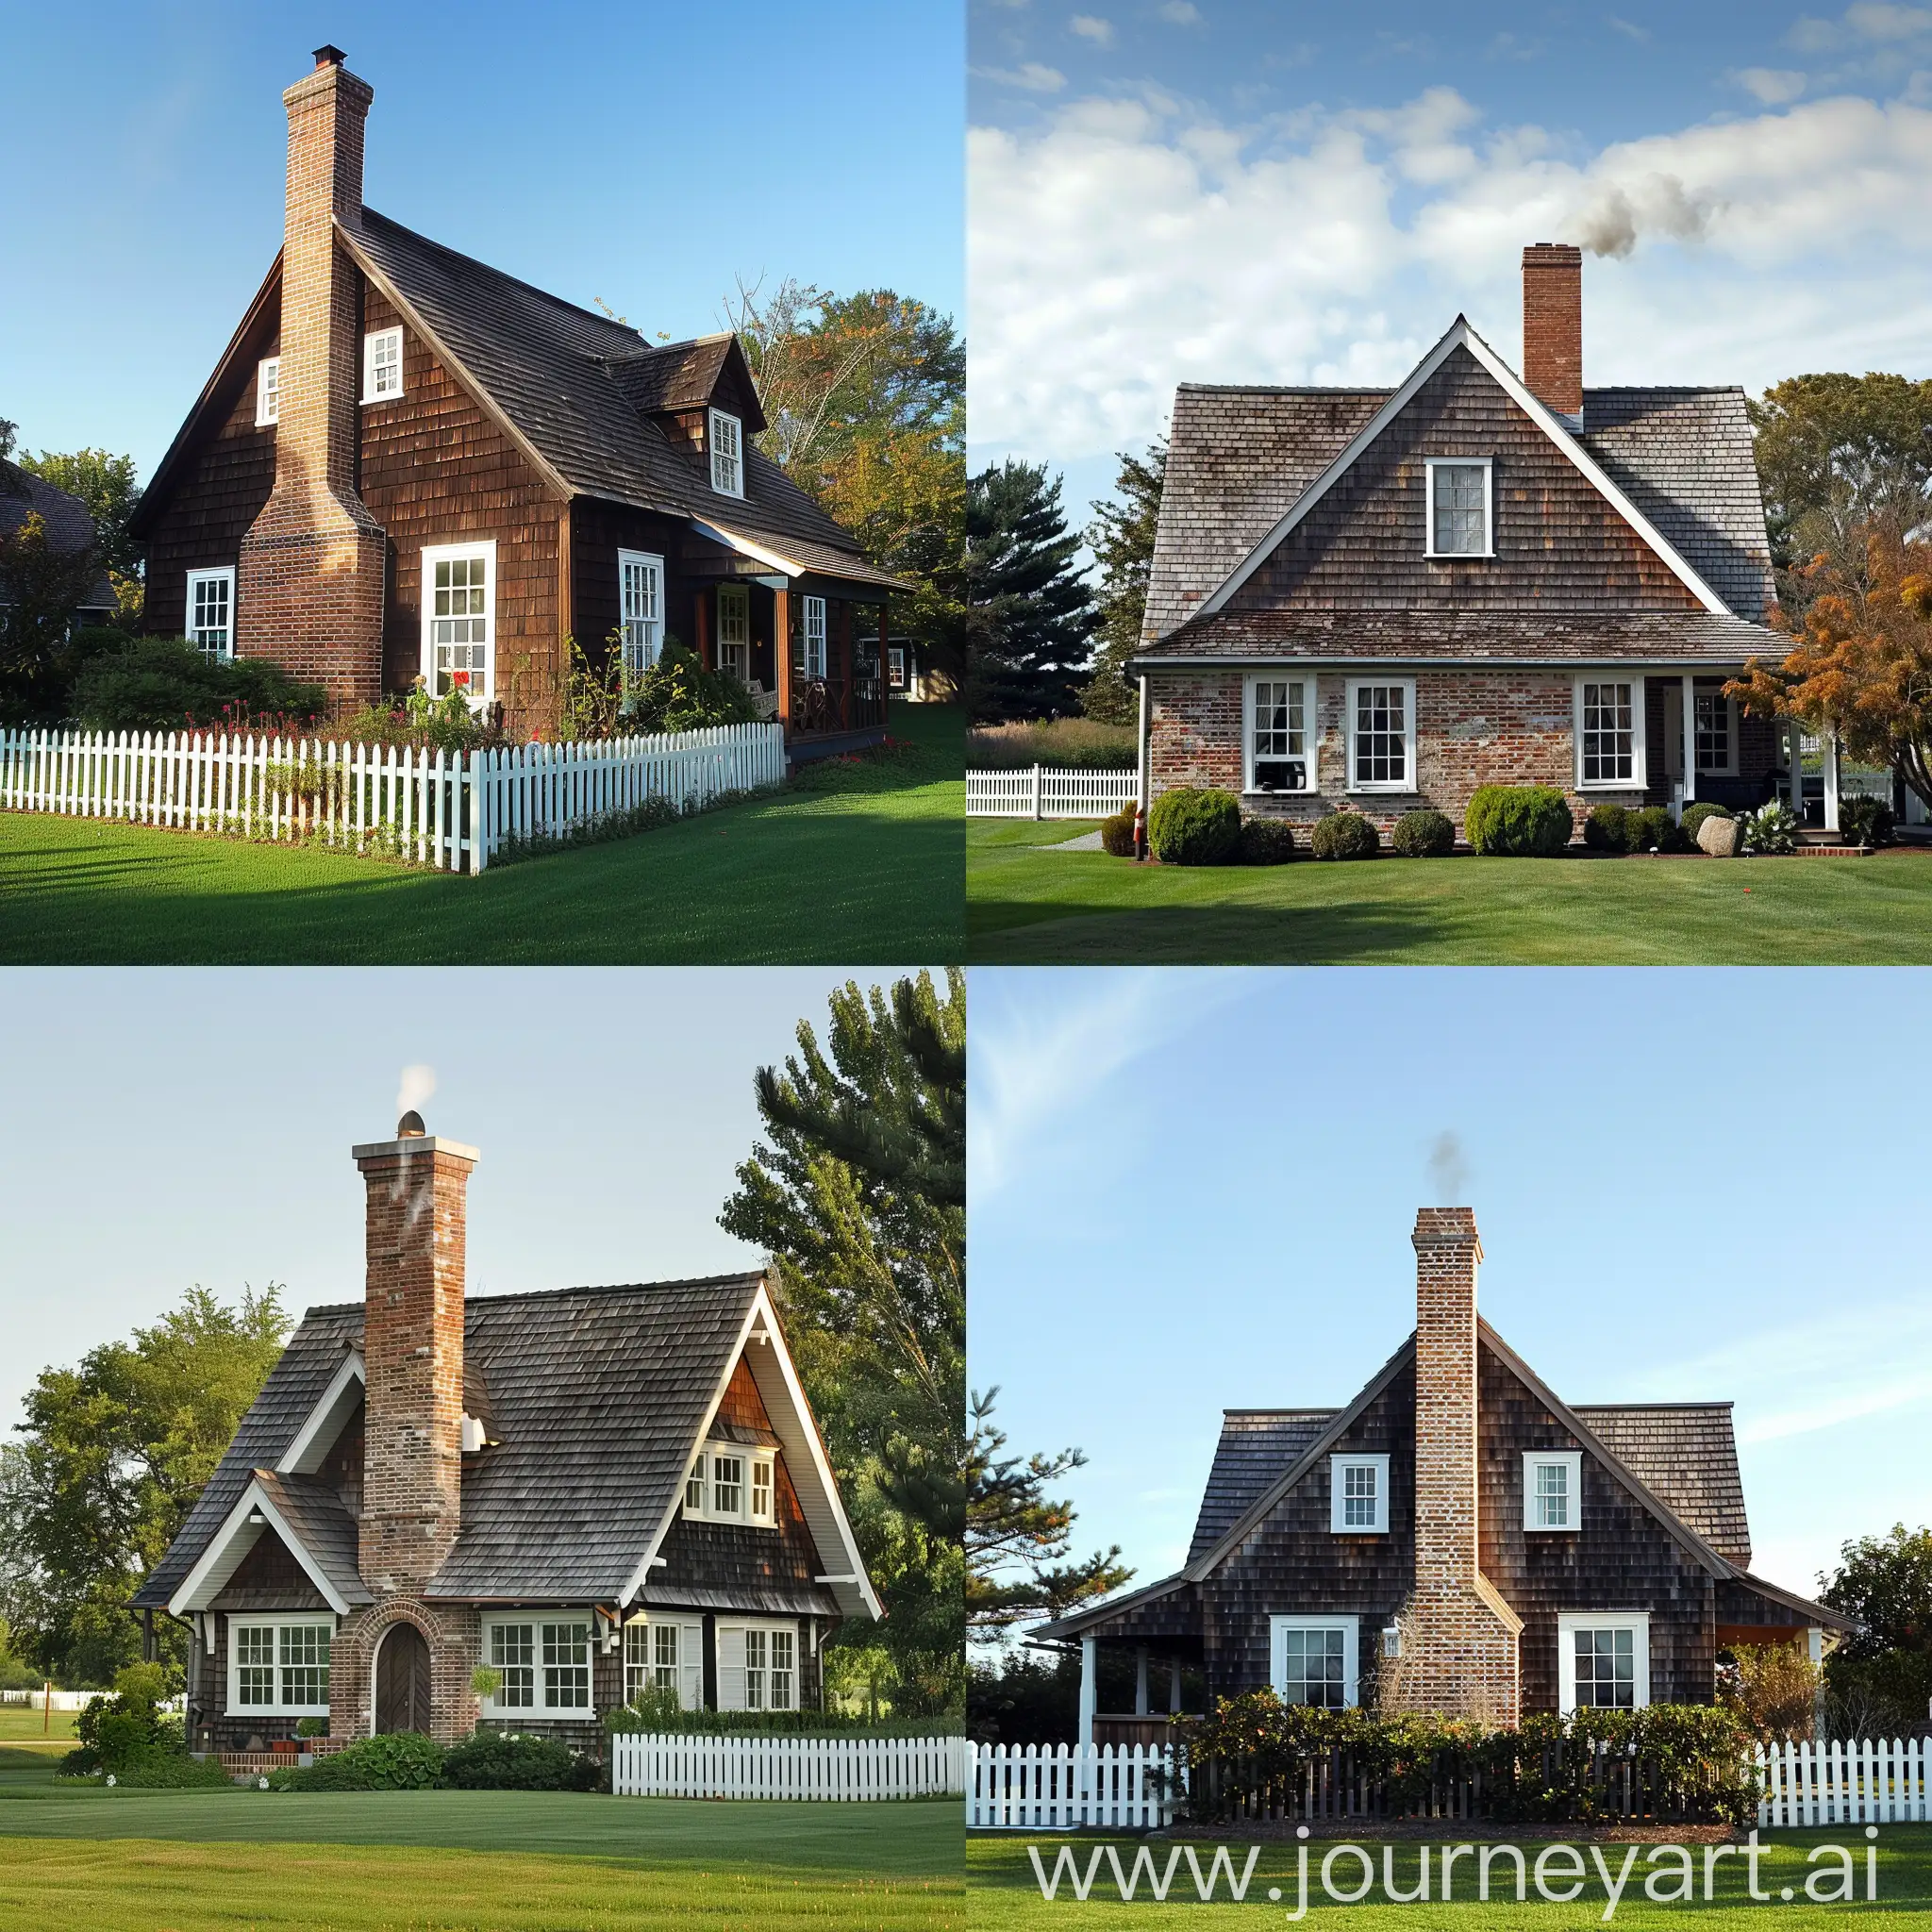 A classic house stands tall with a pitched roof, adorned with a chimney puffing gently. Its sturdy brick or wooden exterior exudes warmth and charm. Windows with white frames peep out from beneath the eaves, while a welcoming front porch invites guests to linger. A neatly manicured lawn surrounds the house, bordered by a white picket fence, completing the quintessential picture of timeless Americana.